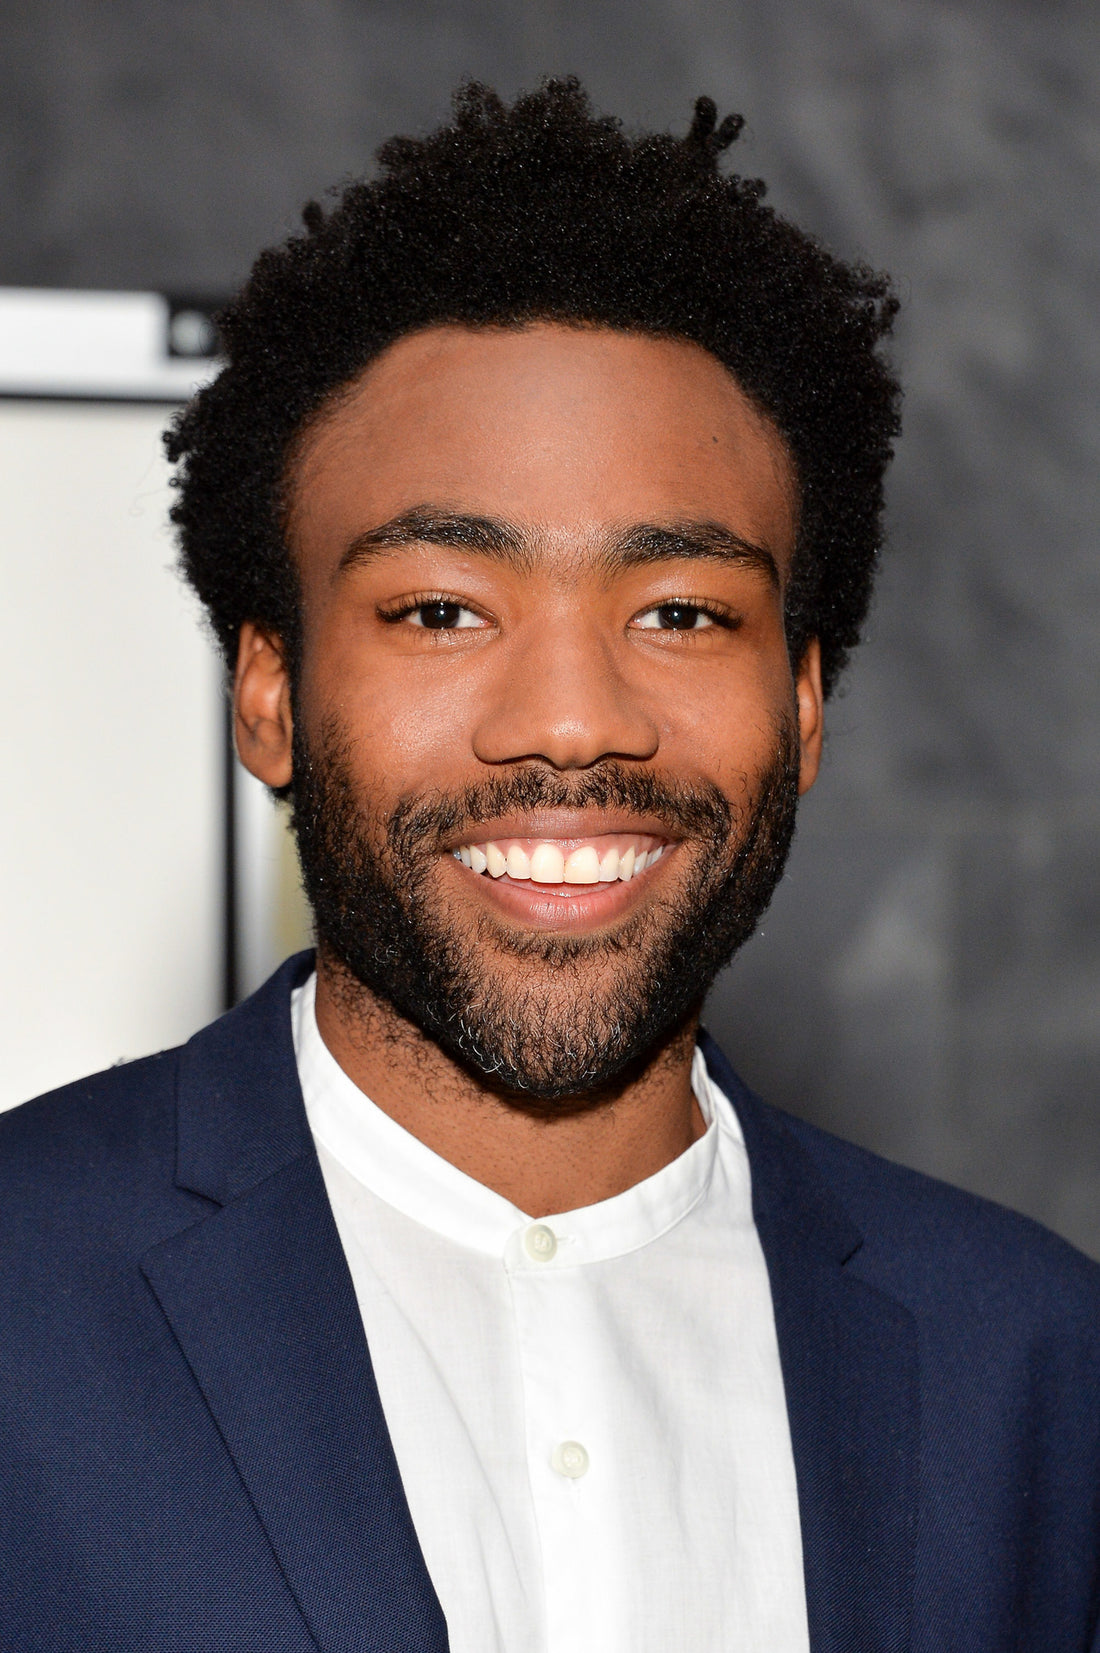 Now Booking Donald Glover